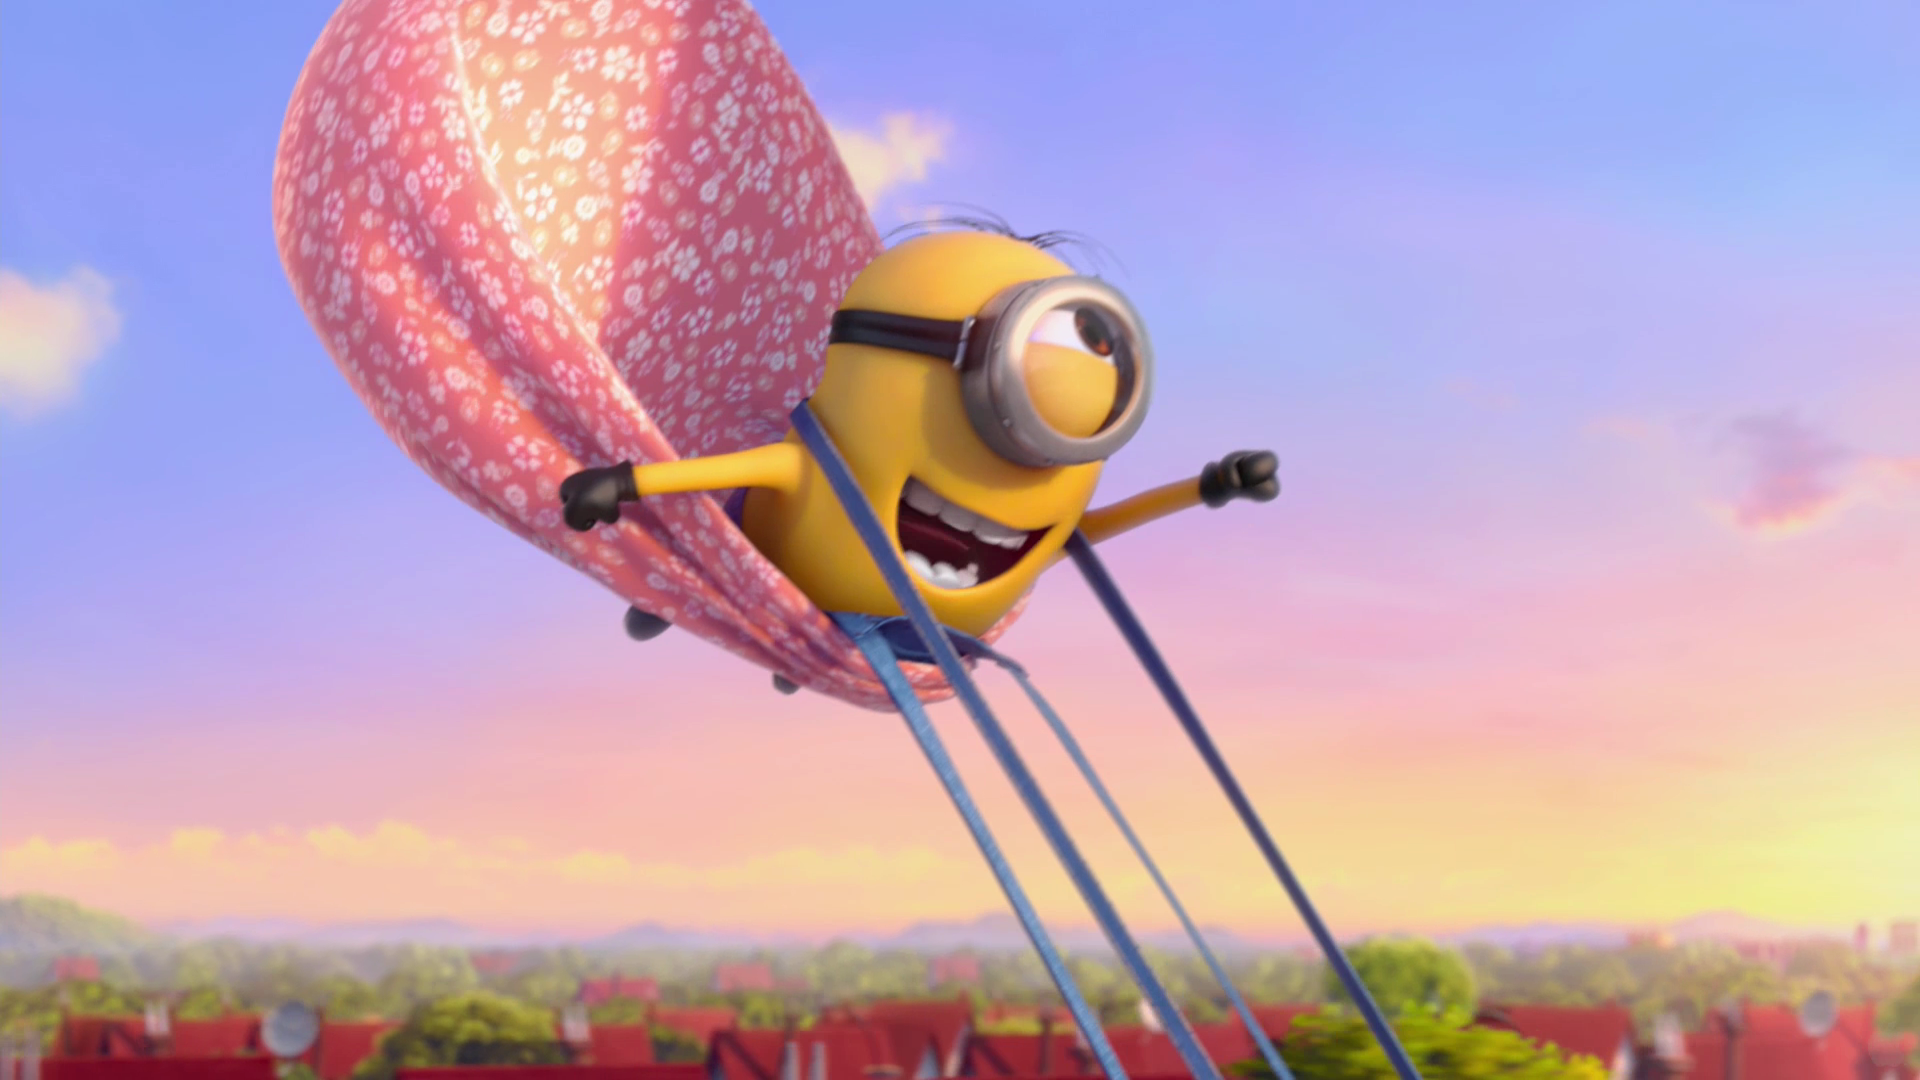 New Minions 2 Movie Wallpapers